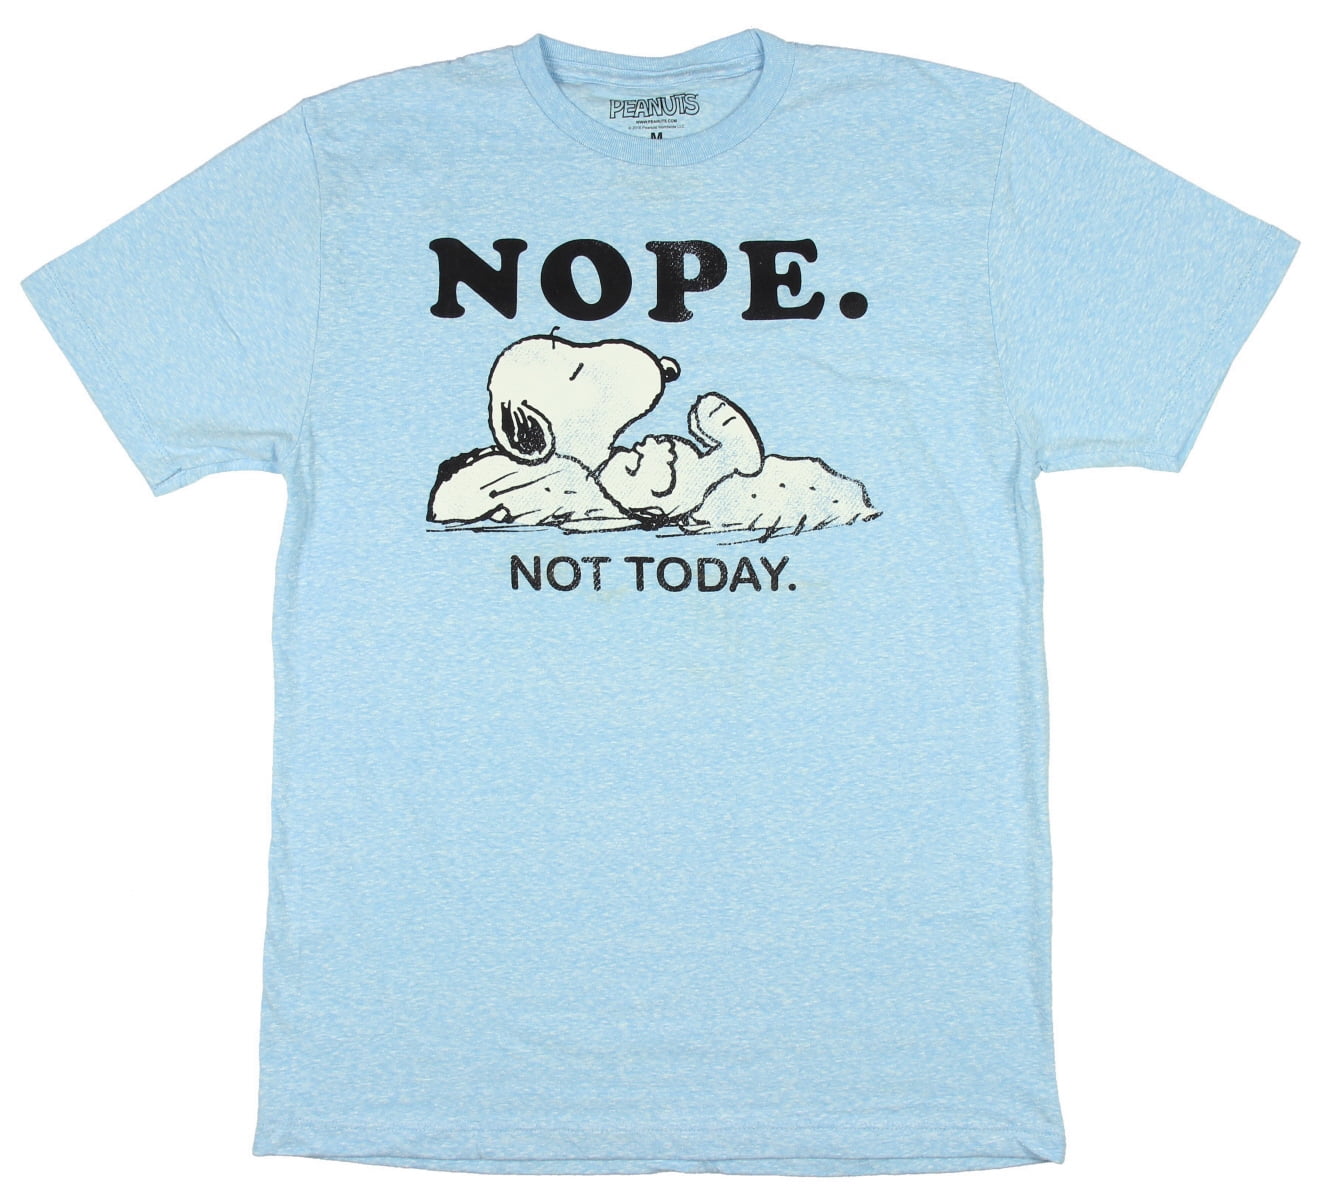 Men/'s Peanuts Snoopy T Shirt Don/'t Worry Be Happy Woodstock Rainbow Graphic Tee